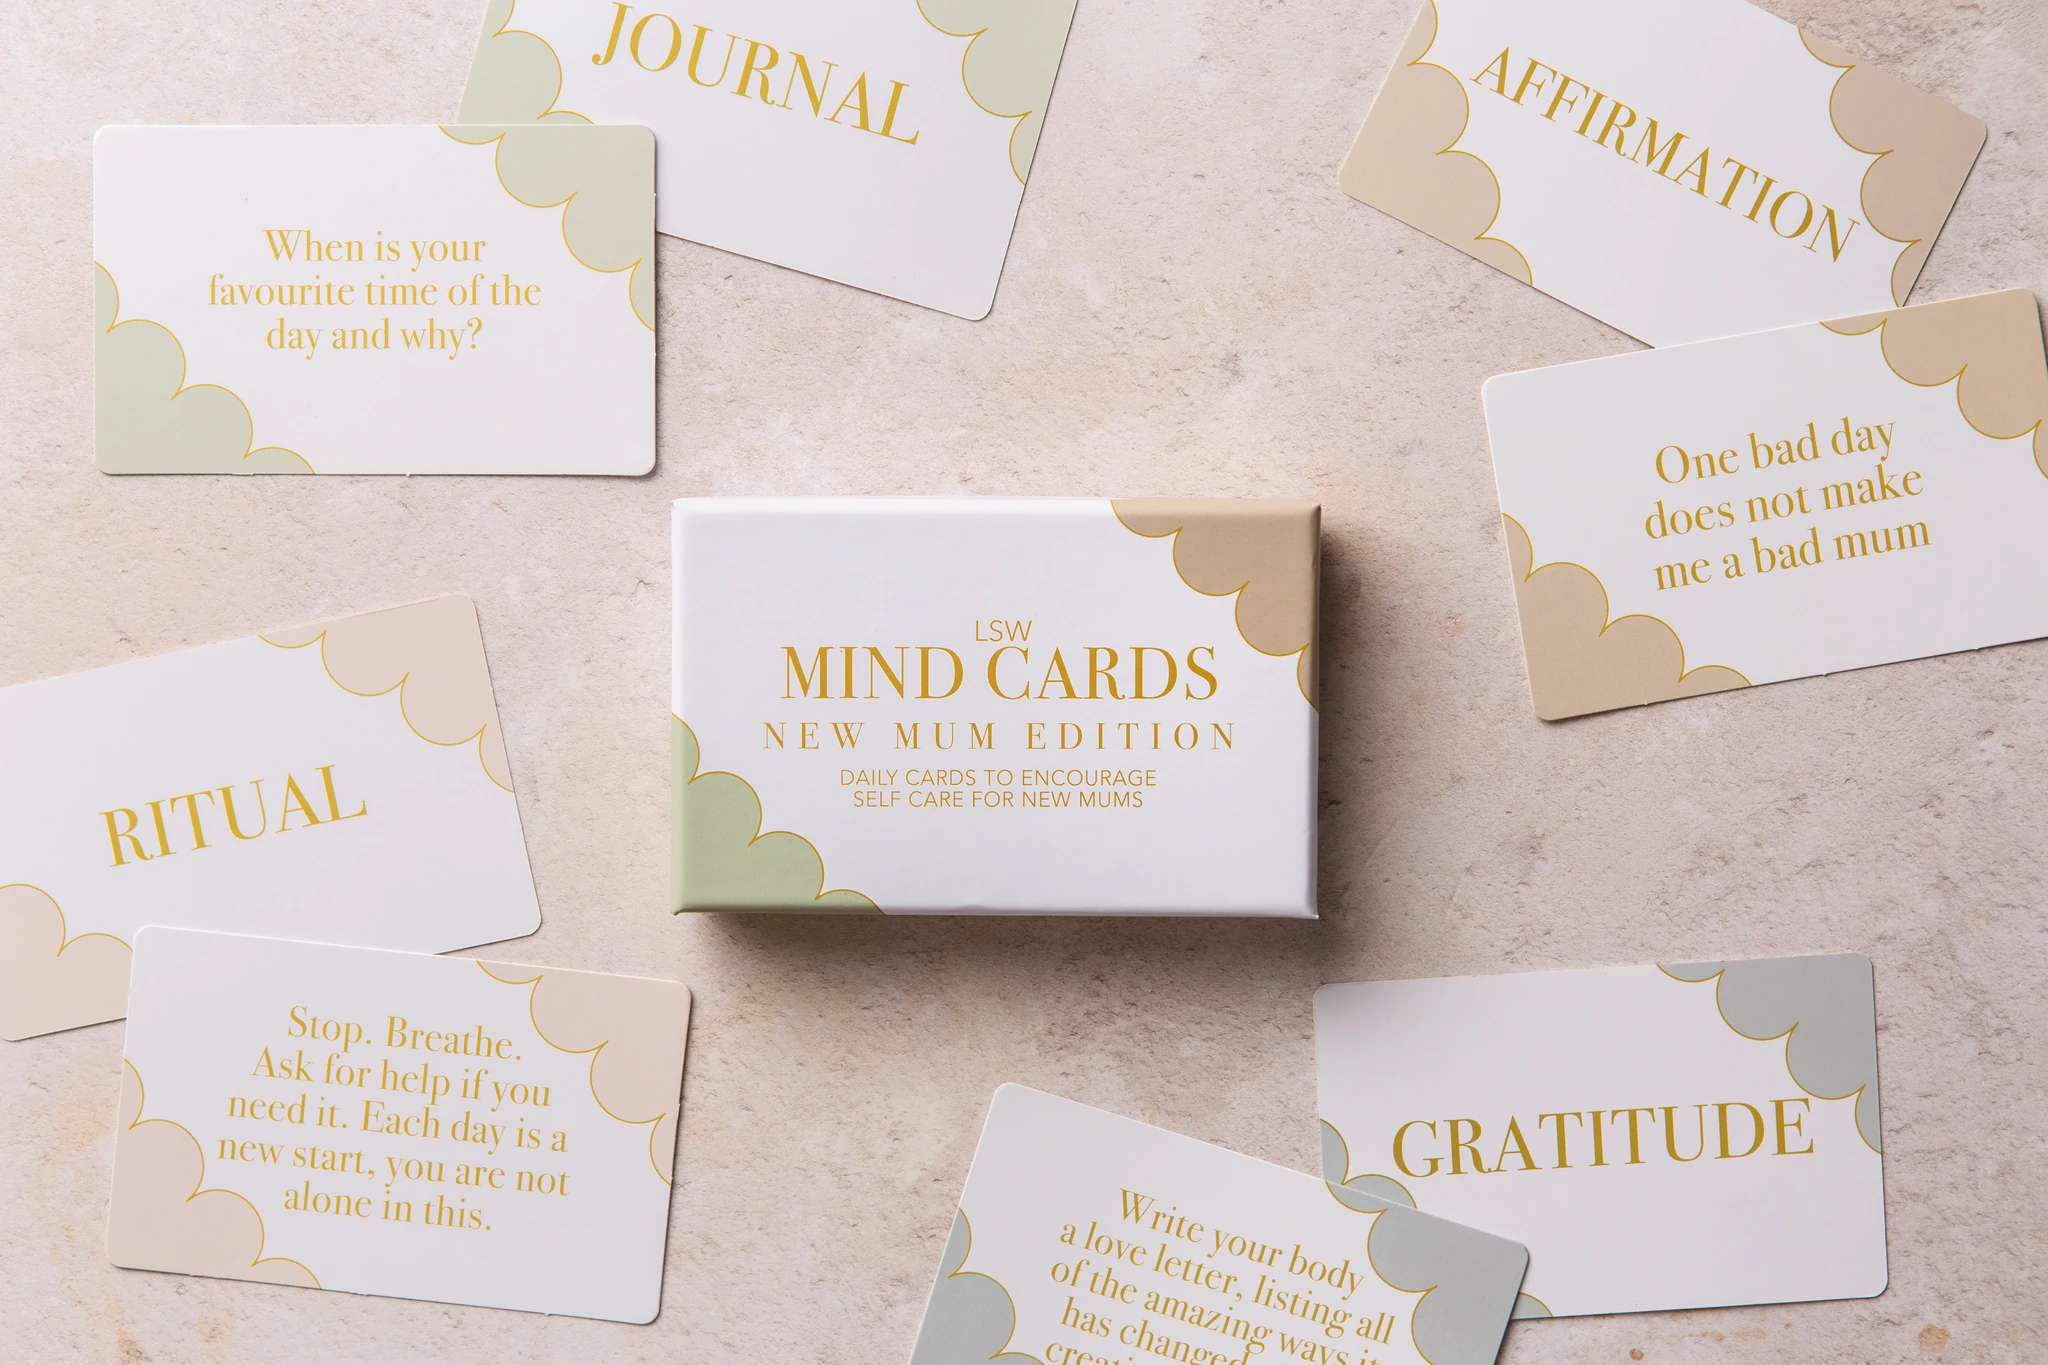 LSW London - Mind Cards New Mum Edition